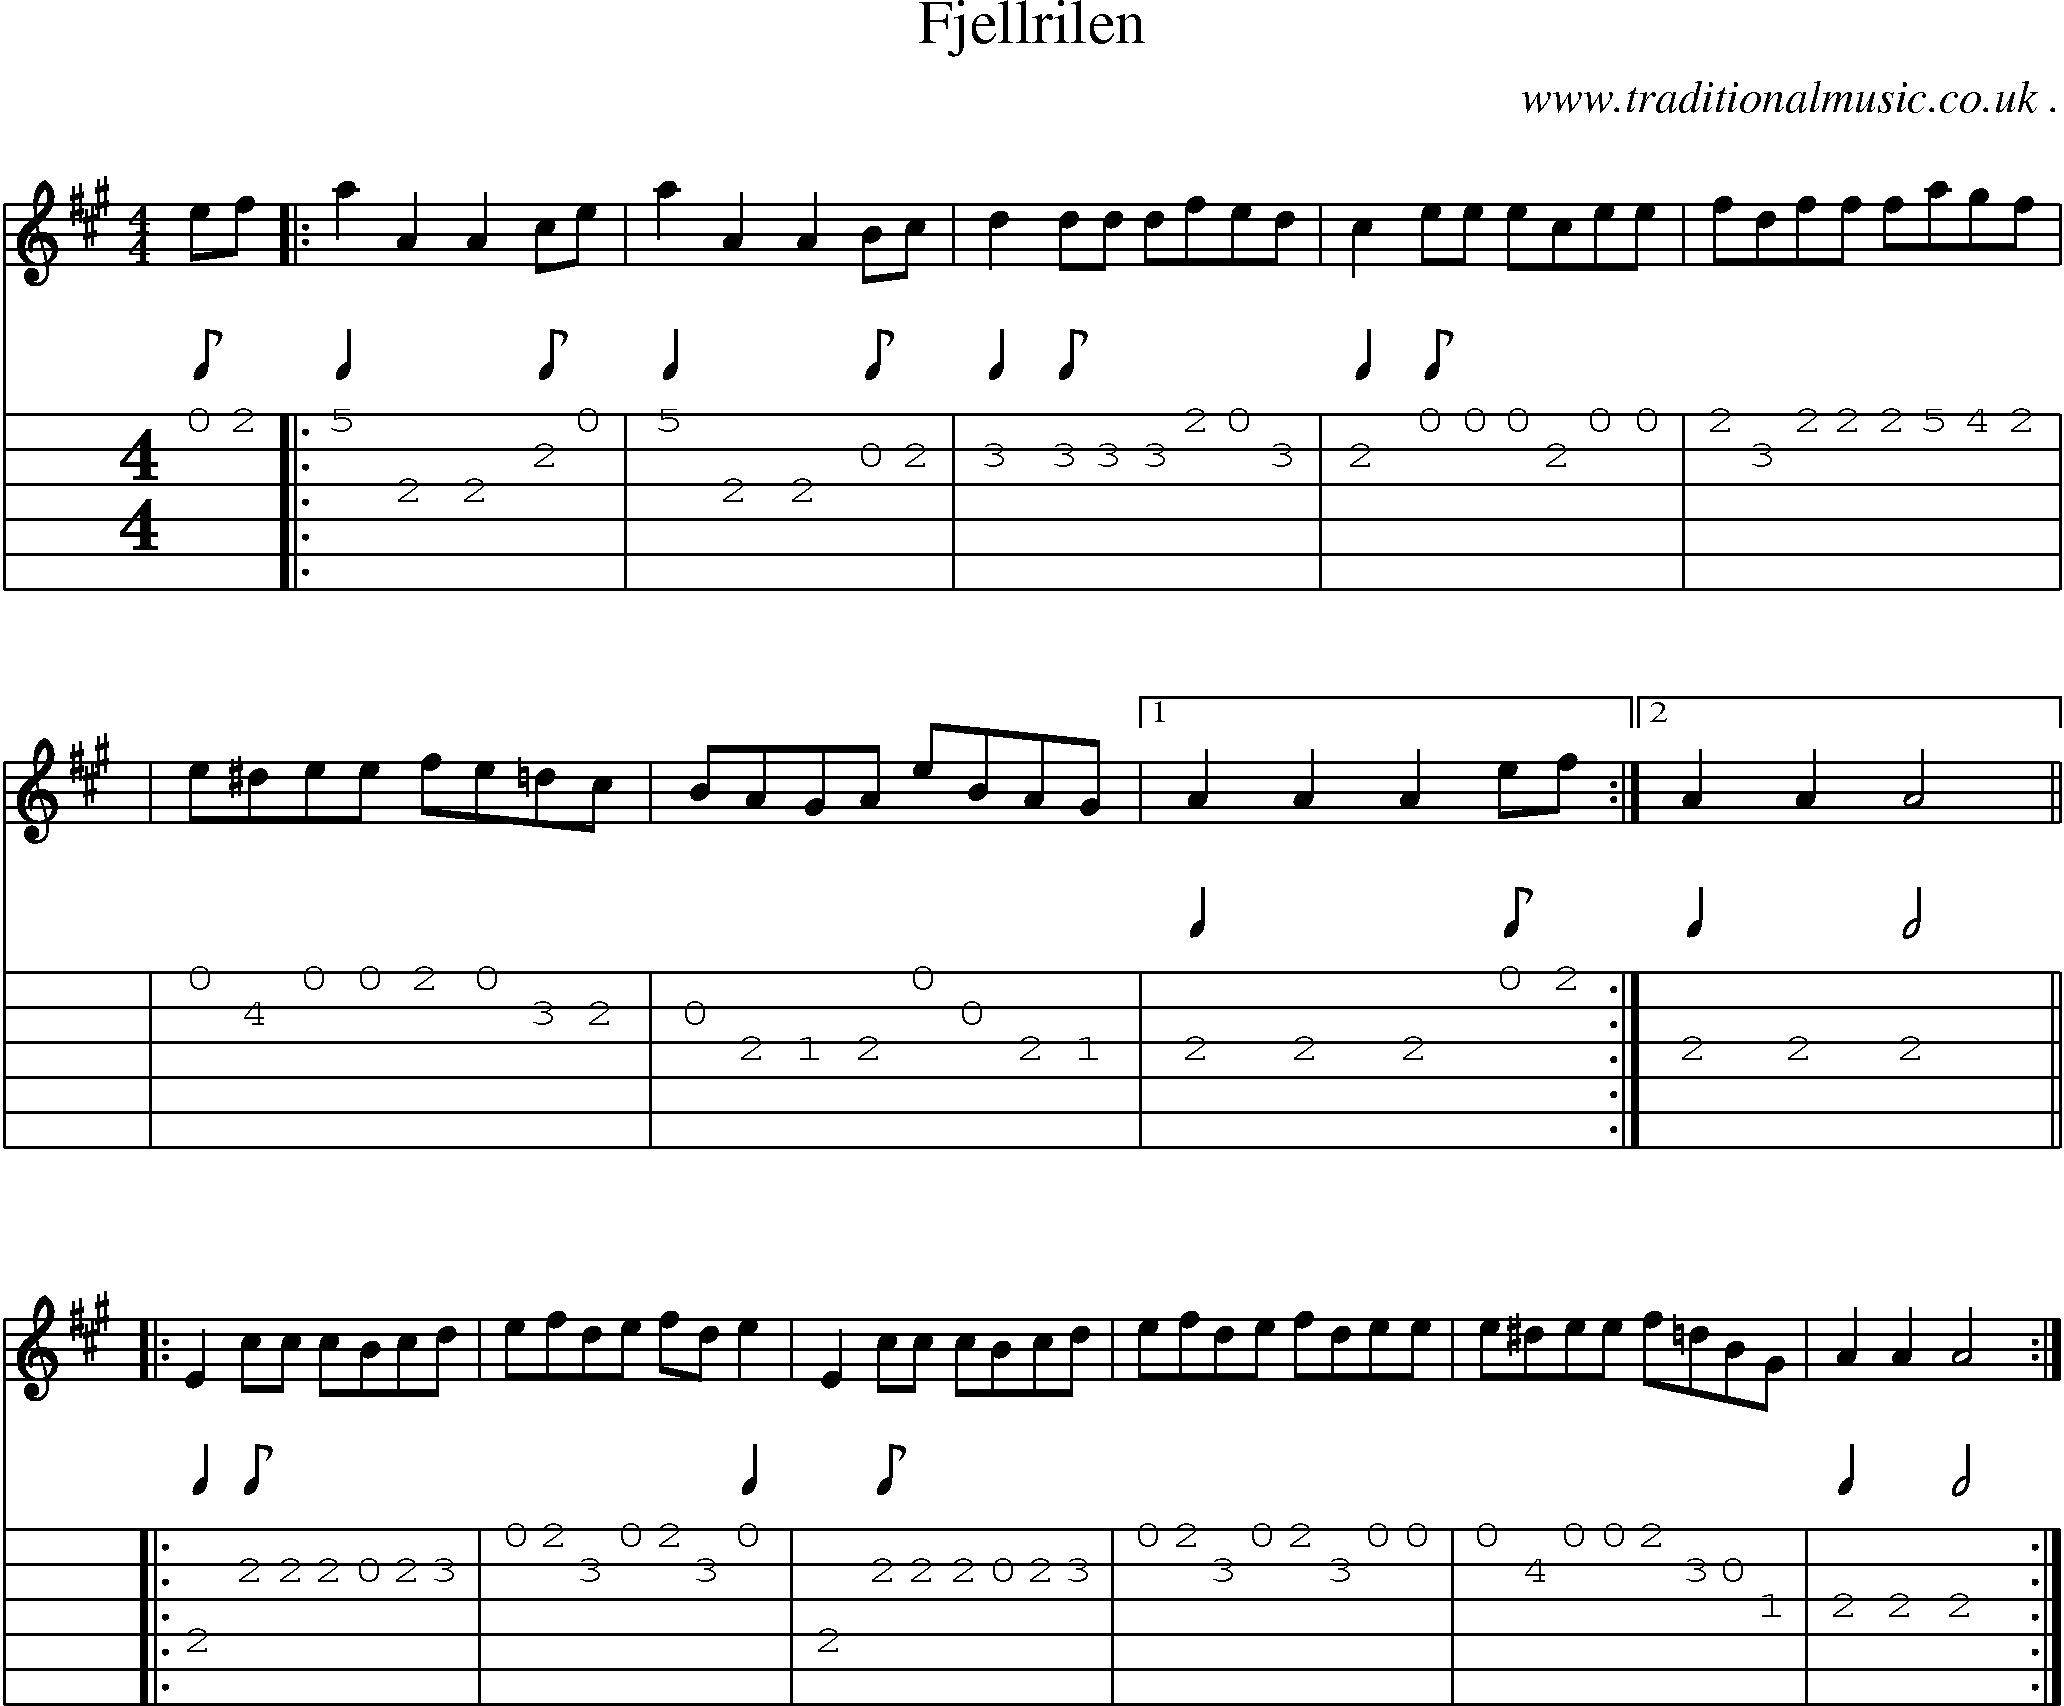 Sheet-music  score, Chords and Guitar Tabs for Fjellrilen